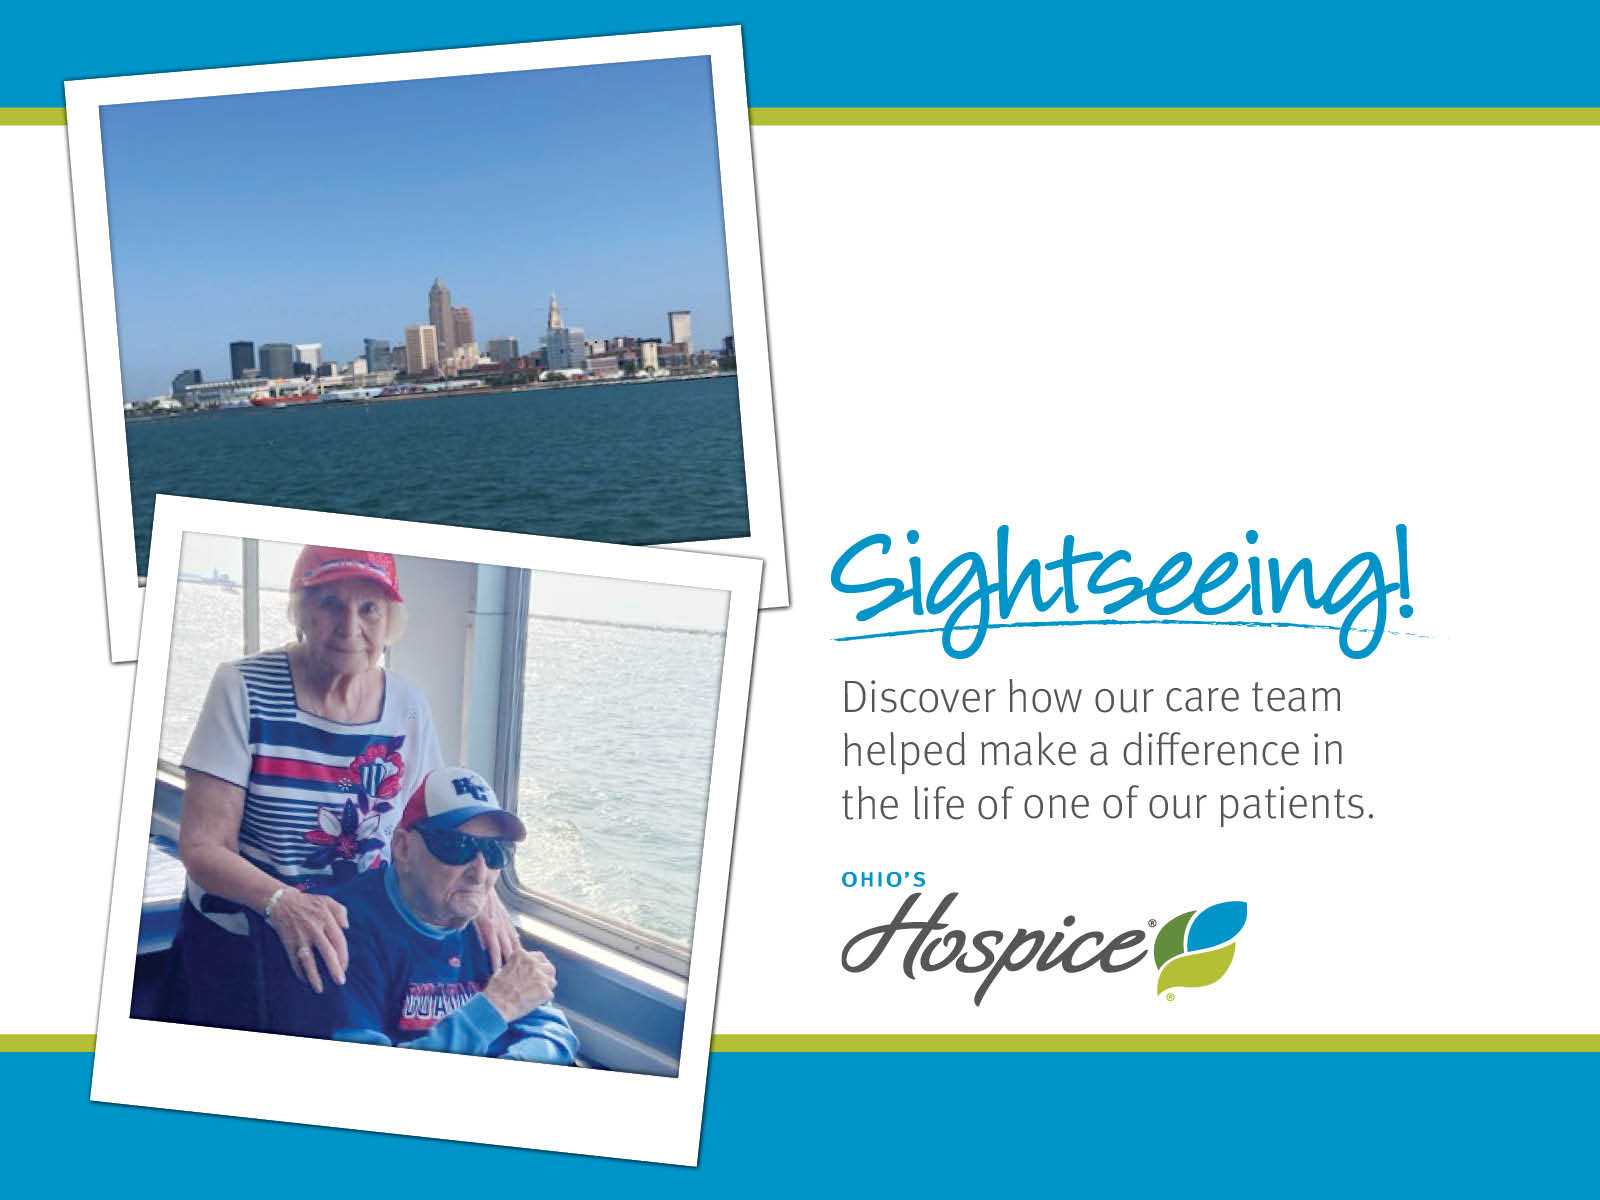 Sightseeing! Discover how our care team helped make a difference in the life of one of our patients. Ohio's Hospice